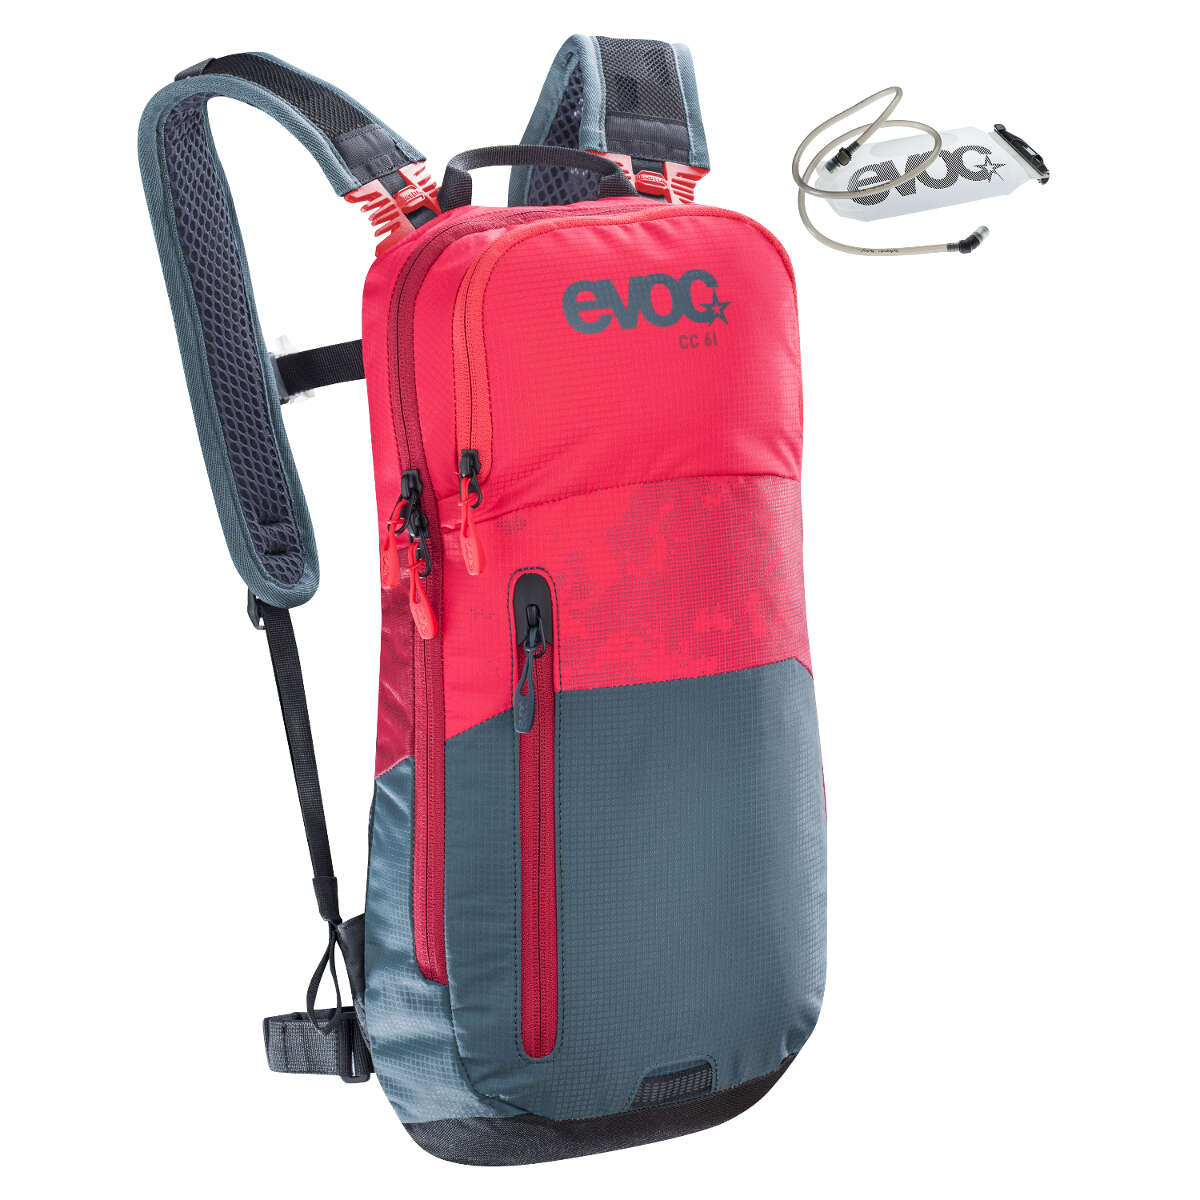 Evoc Backpack with Hydration System Cross Country Slate Red, 6 + 2 Liter